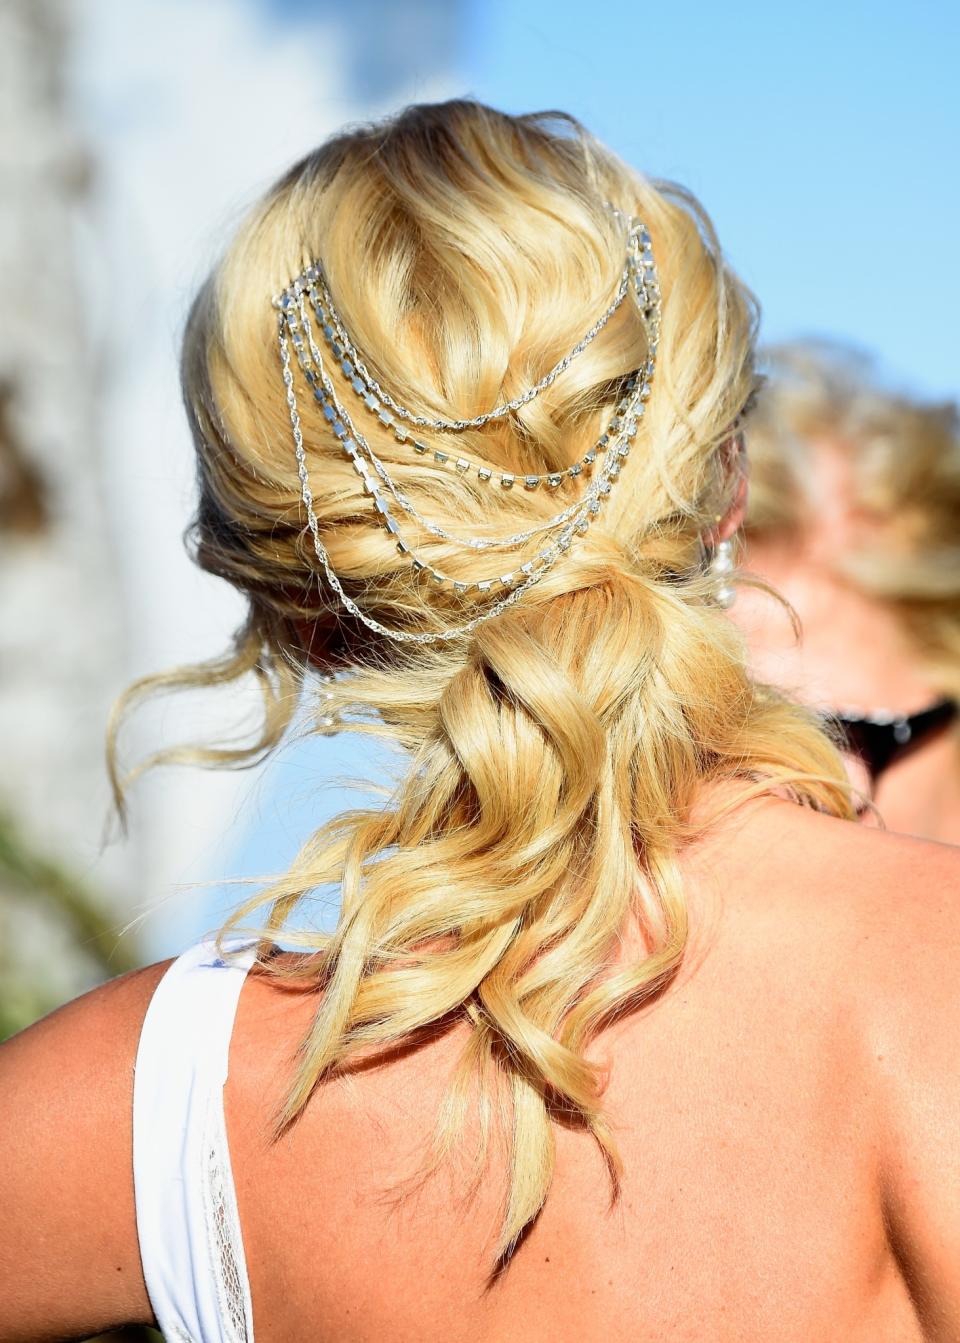 Half-up, half-down prom hairstyles: Add some bling